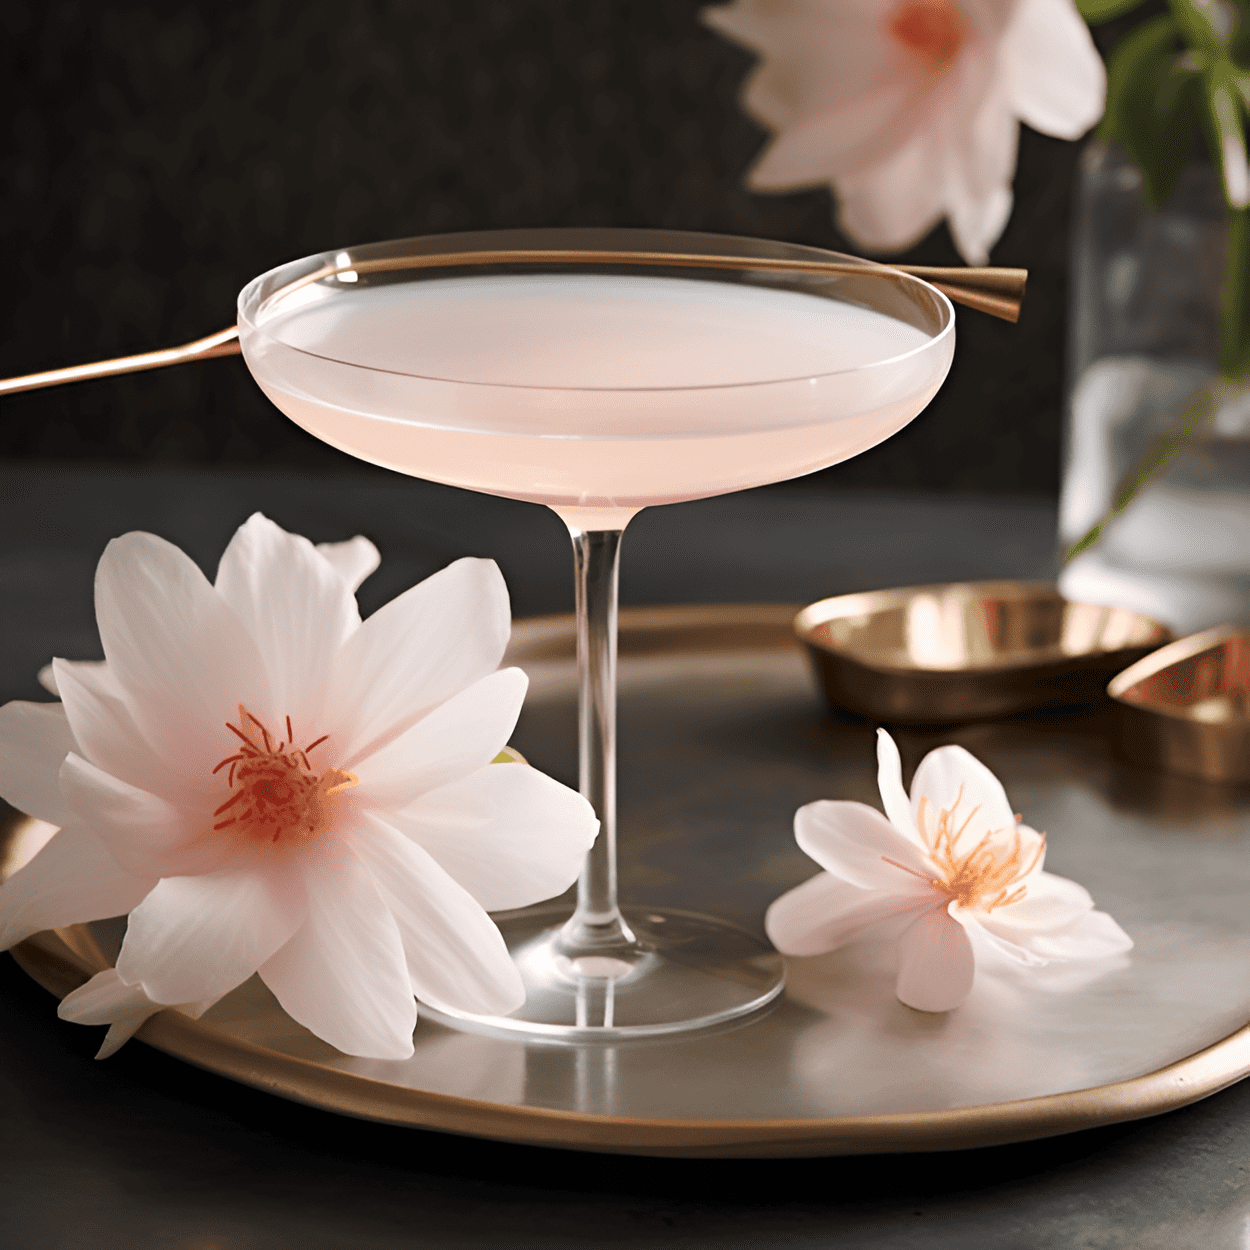 Lotus Cocktail Recipe - The Lotus cocktail is a delightful blend of sweet, sour, and floral notes. The sweetness of the lychee liqueur is balanced by the tartness of the lime juice, while the gin adds a subtle floral undertone. The result is a cocktail that is refreshing, sophisticated, and utterly delicious.